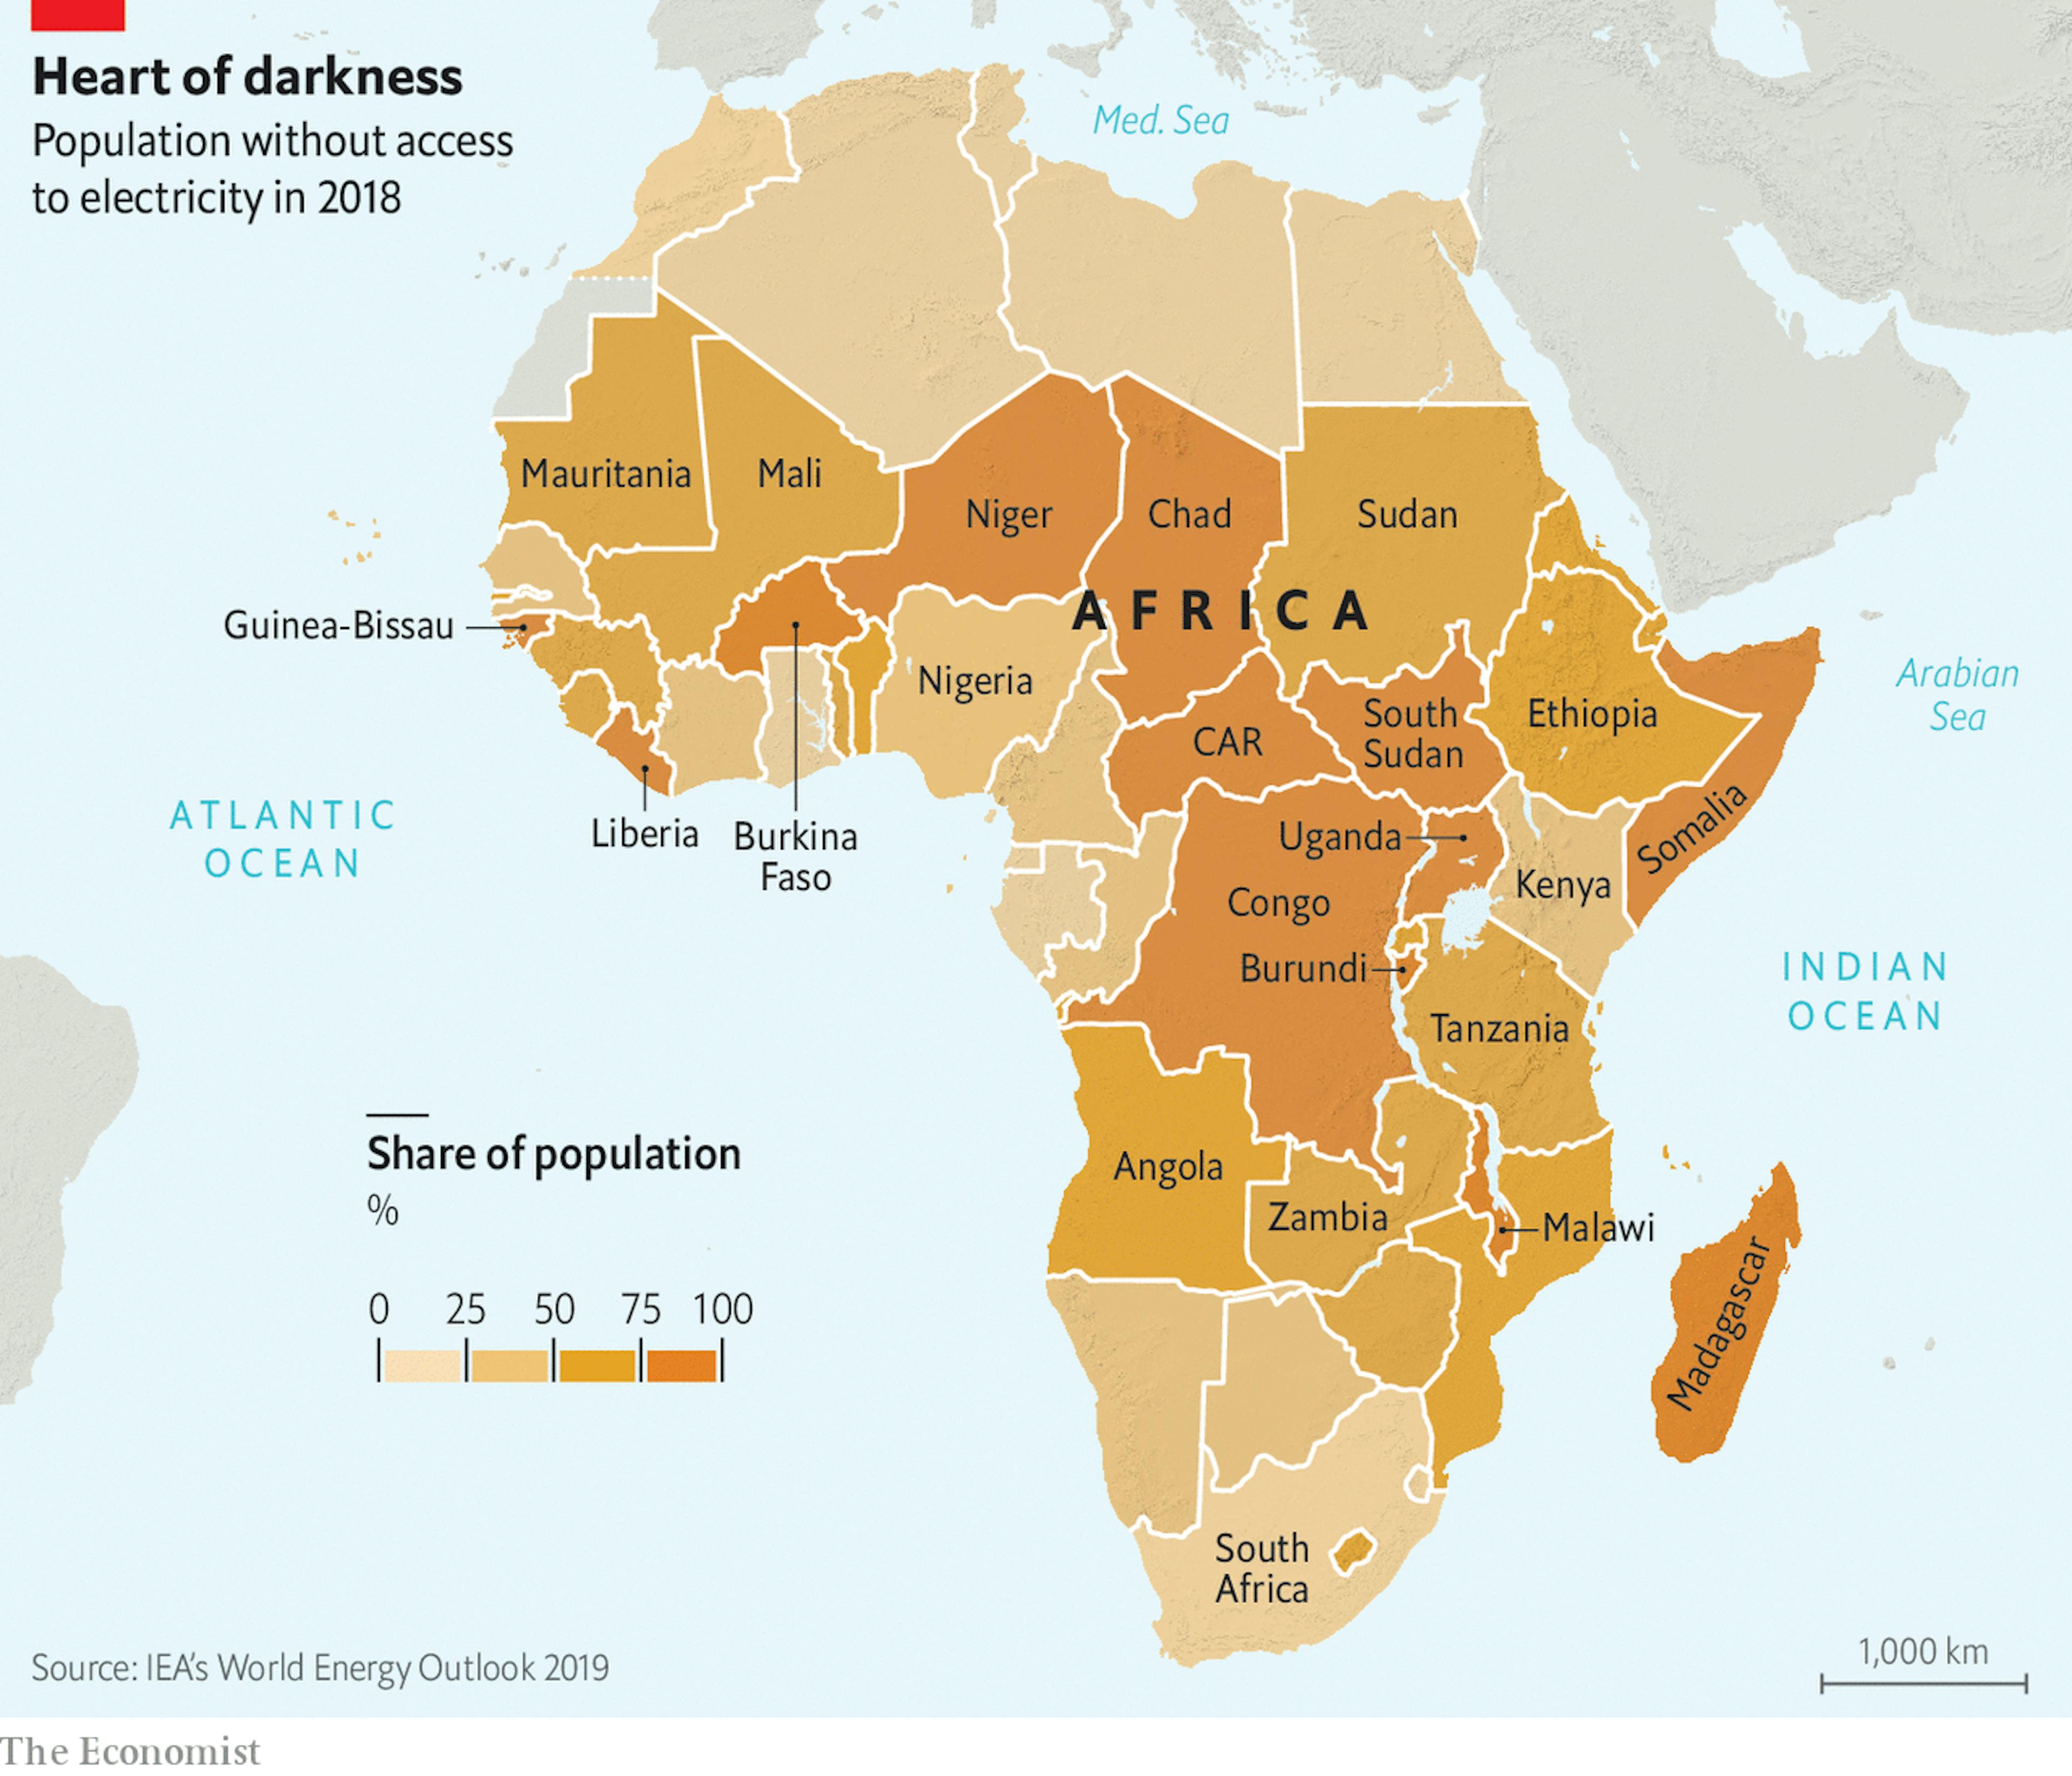 African countries without access to electricity. Source: IEA Energy Outlook